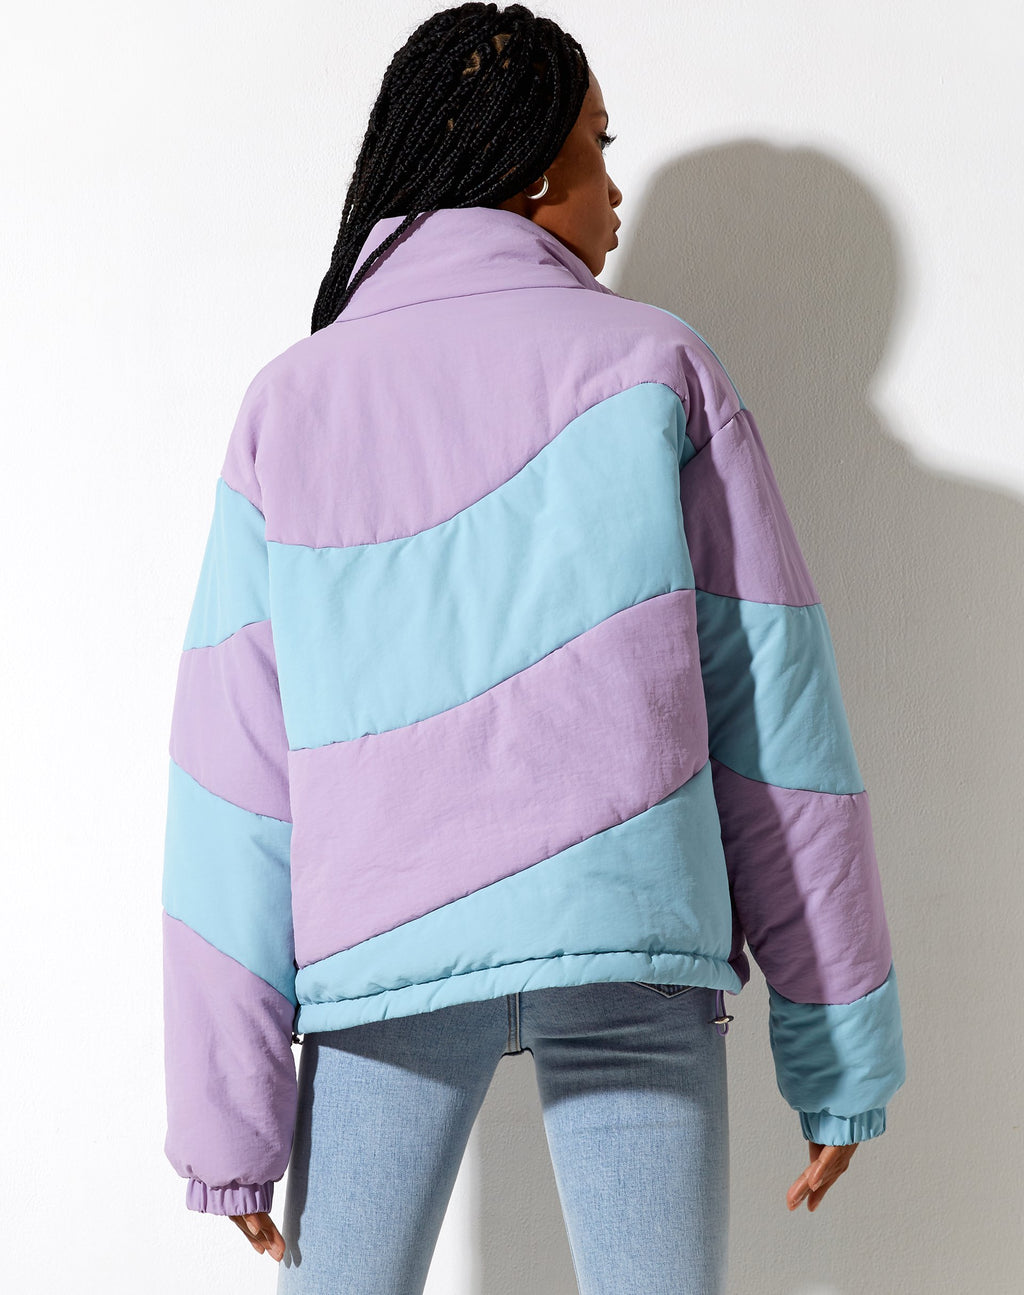 Renee Puffa Jacket in Panelled Purple and Blue